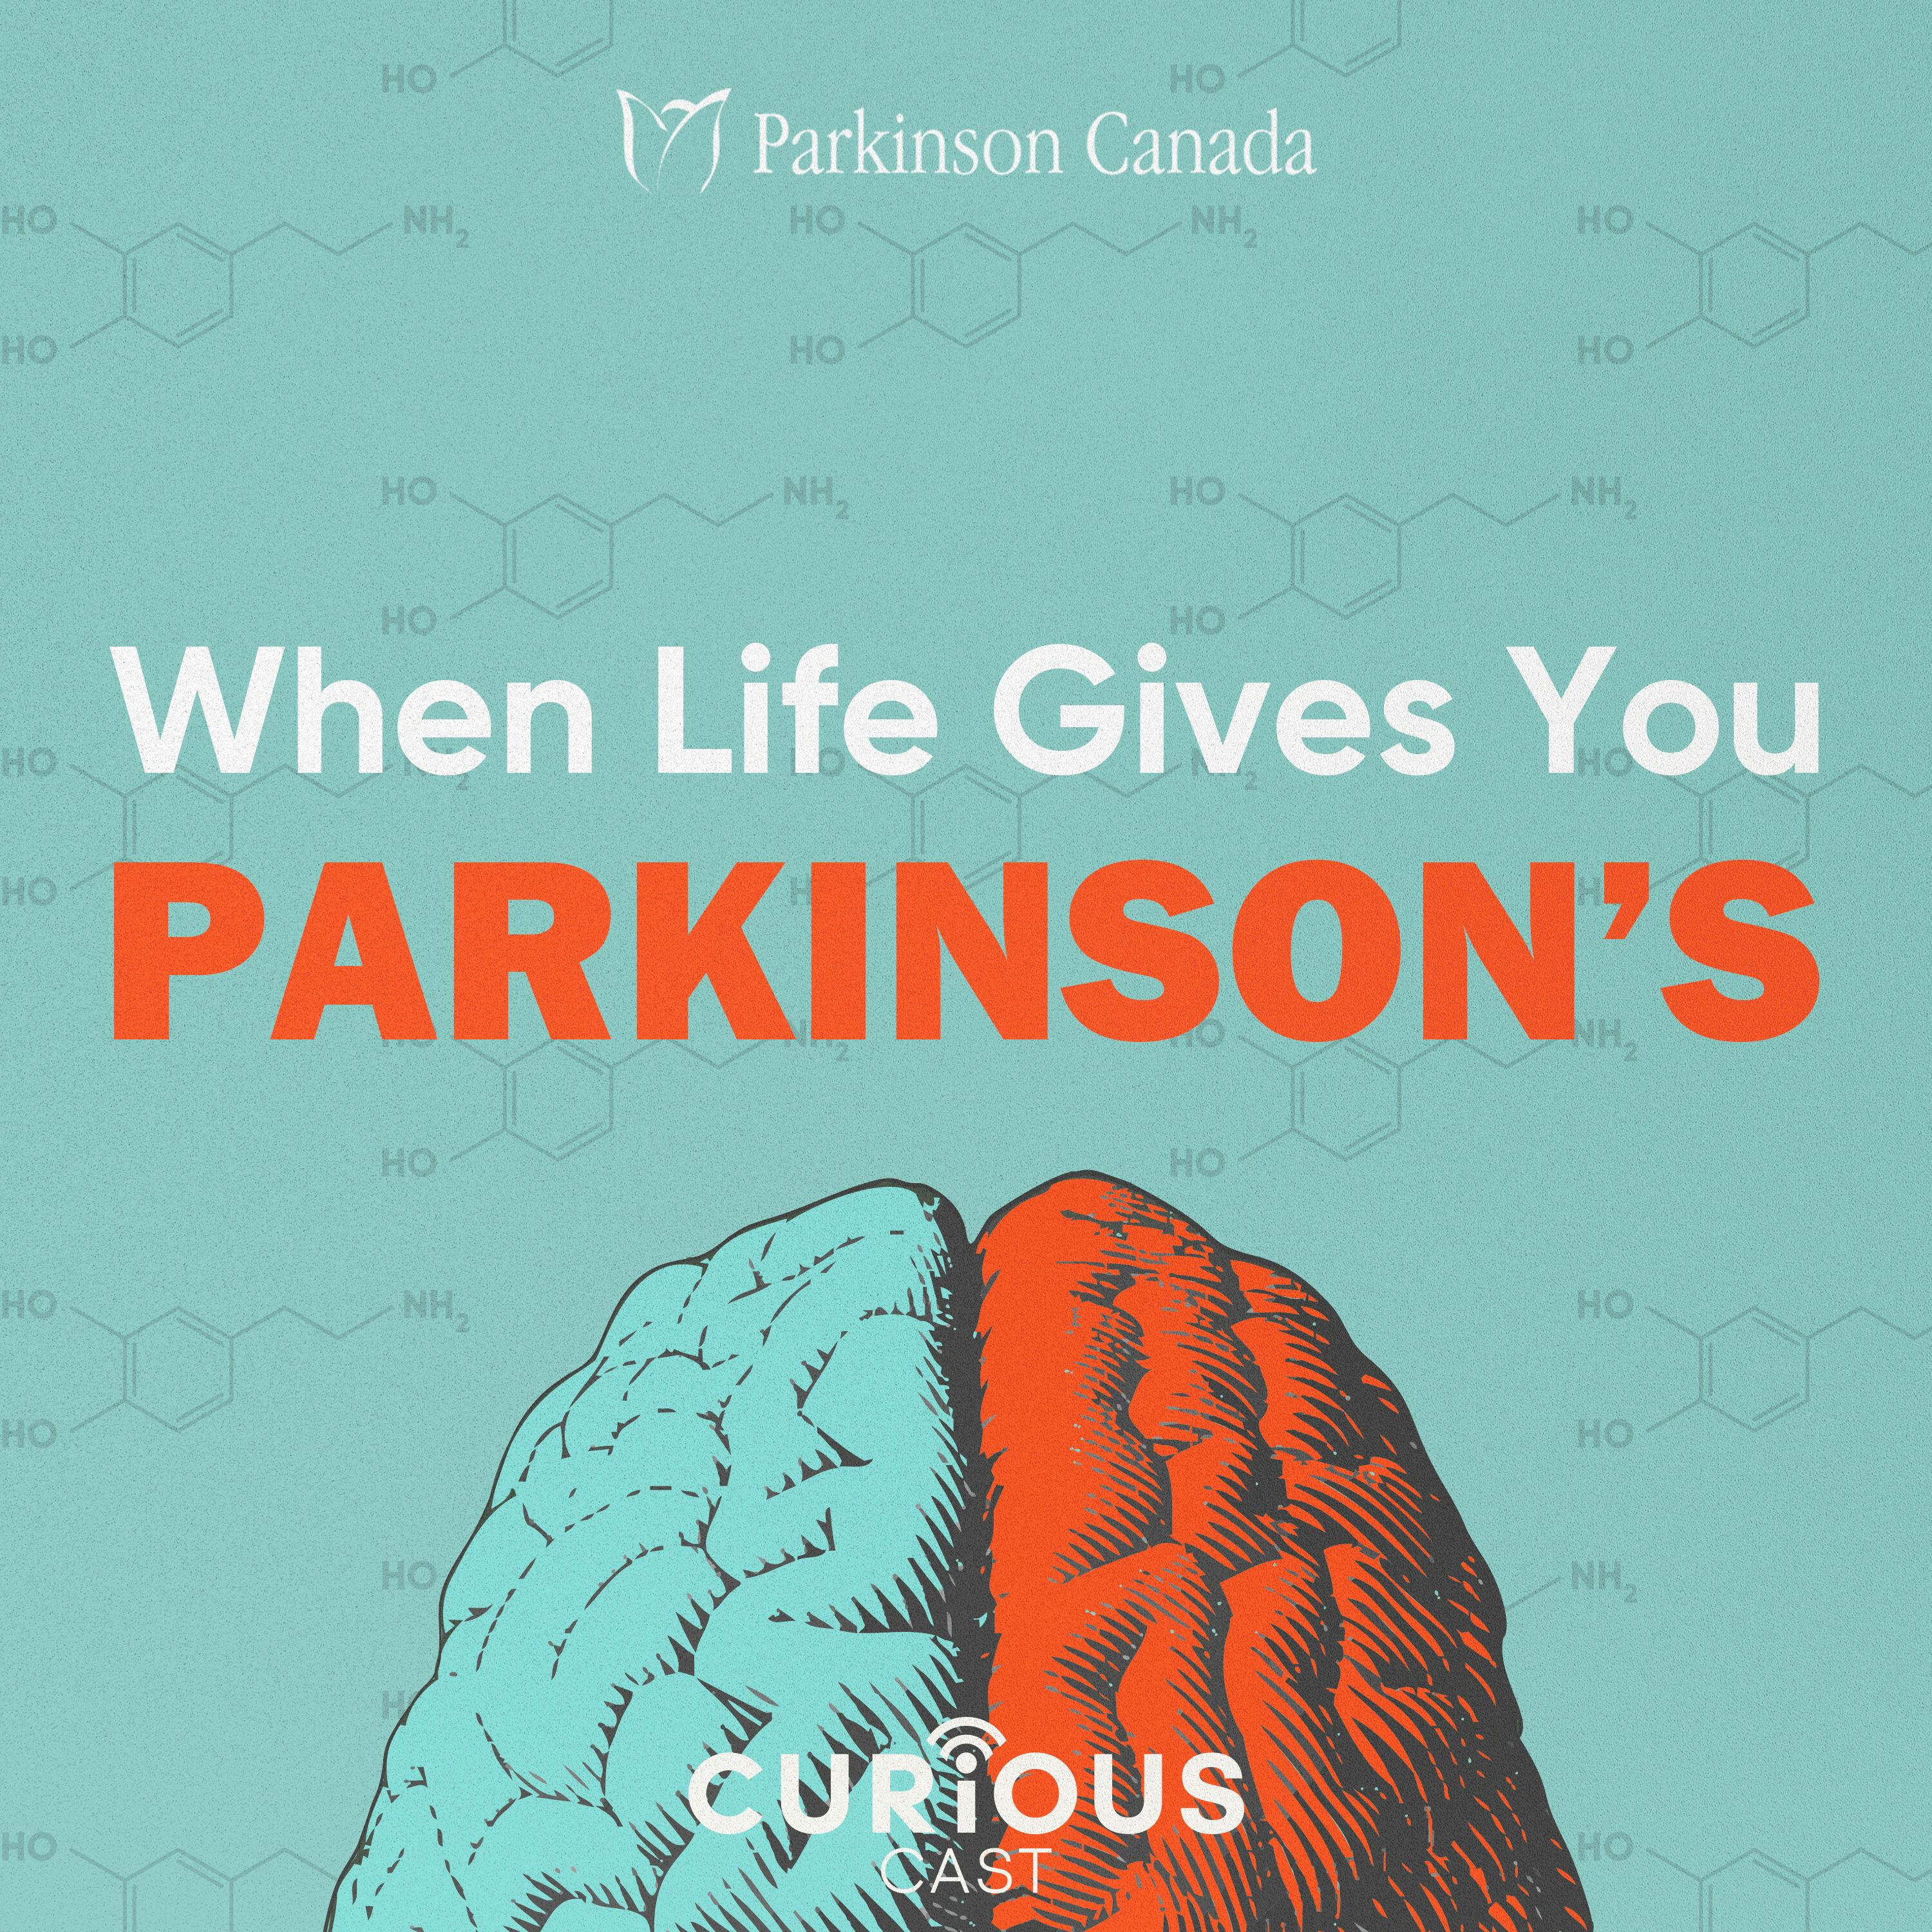 Extra Dosage | Empowering People with Parkinson’s